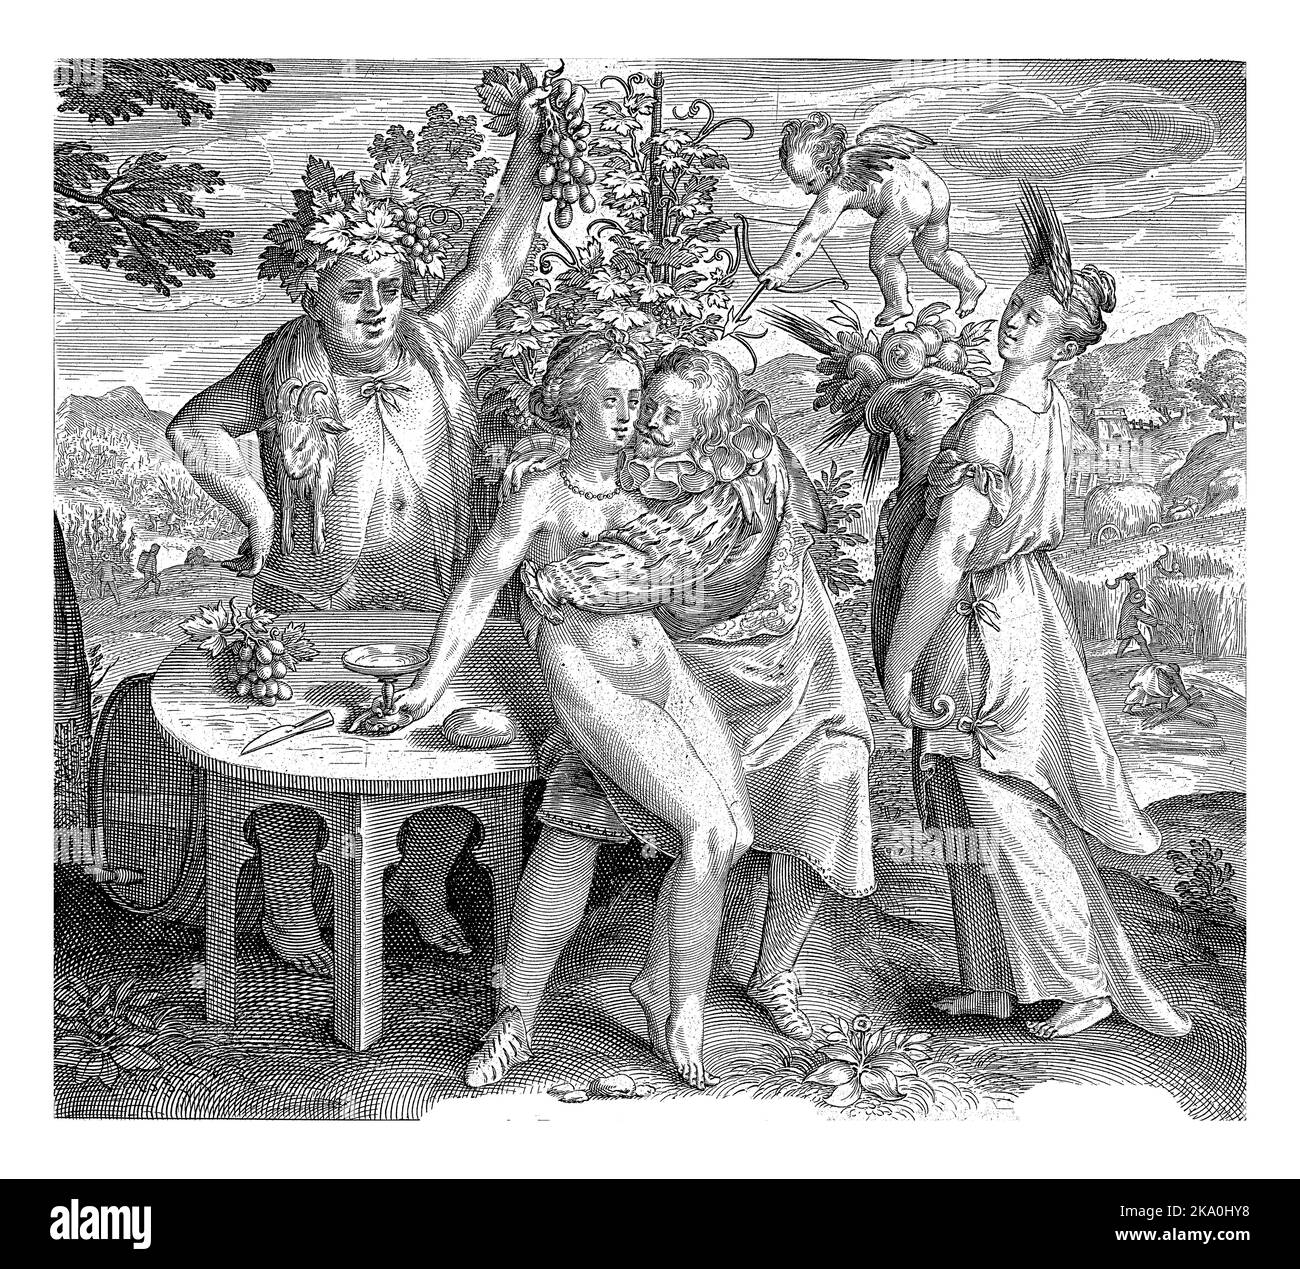 Man feeds love, here represented by the female personification Venus, with wine and bread. Bacchus stands behind the couple with bunches of grapes and Stock Photo